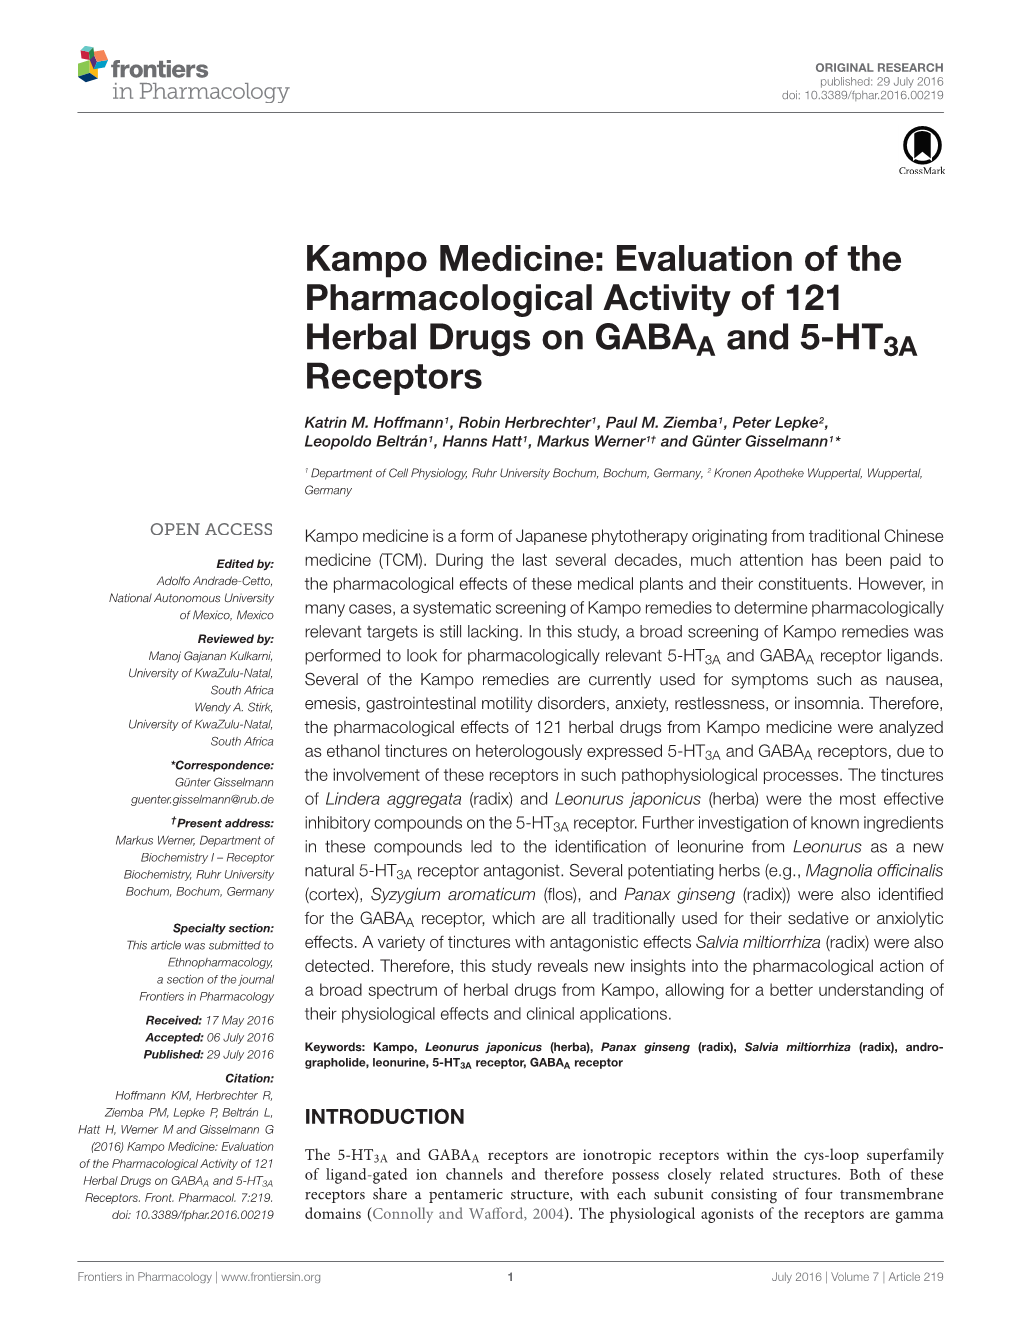 Evaluation of the Pharmacological Activity of 121 Herbal Drugs on GABAA and 5-HT3A Receptors